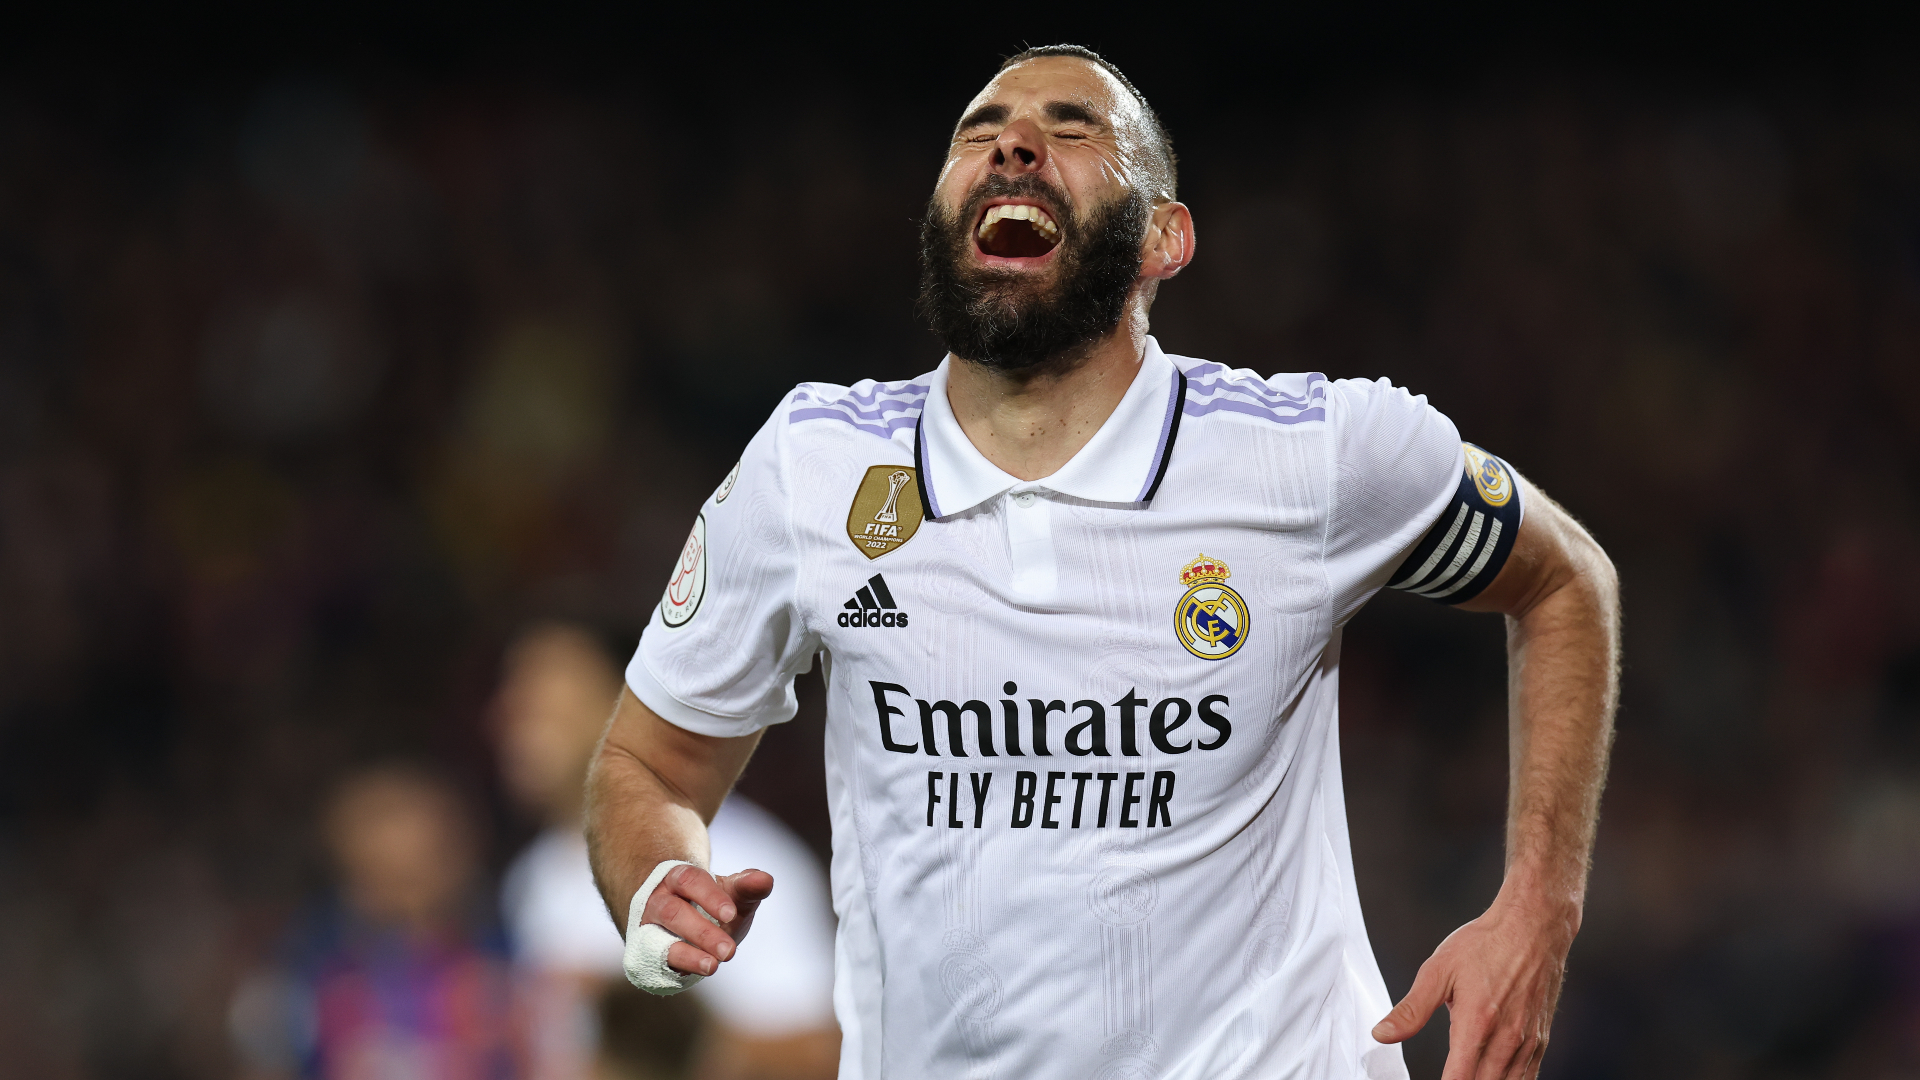 Ancelotti: Benzema back to his best